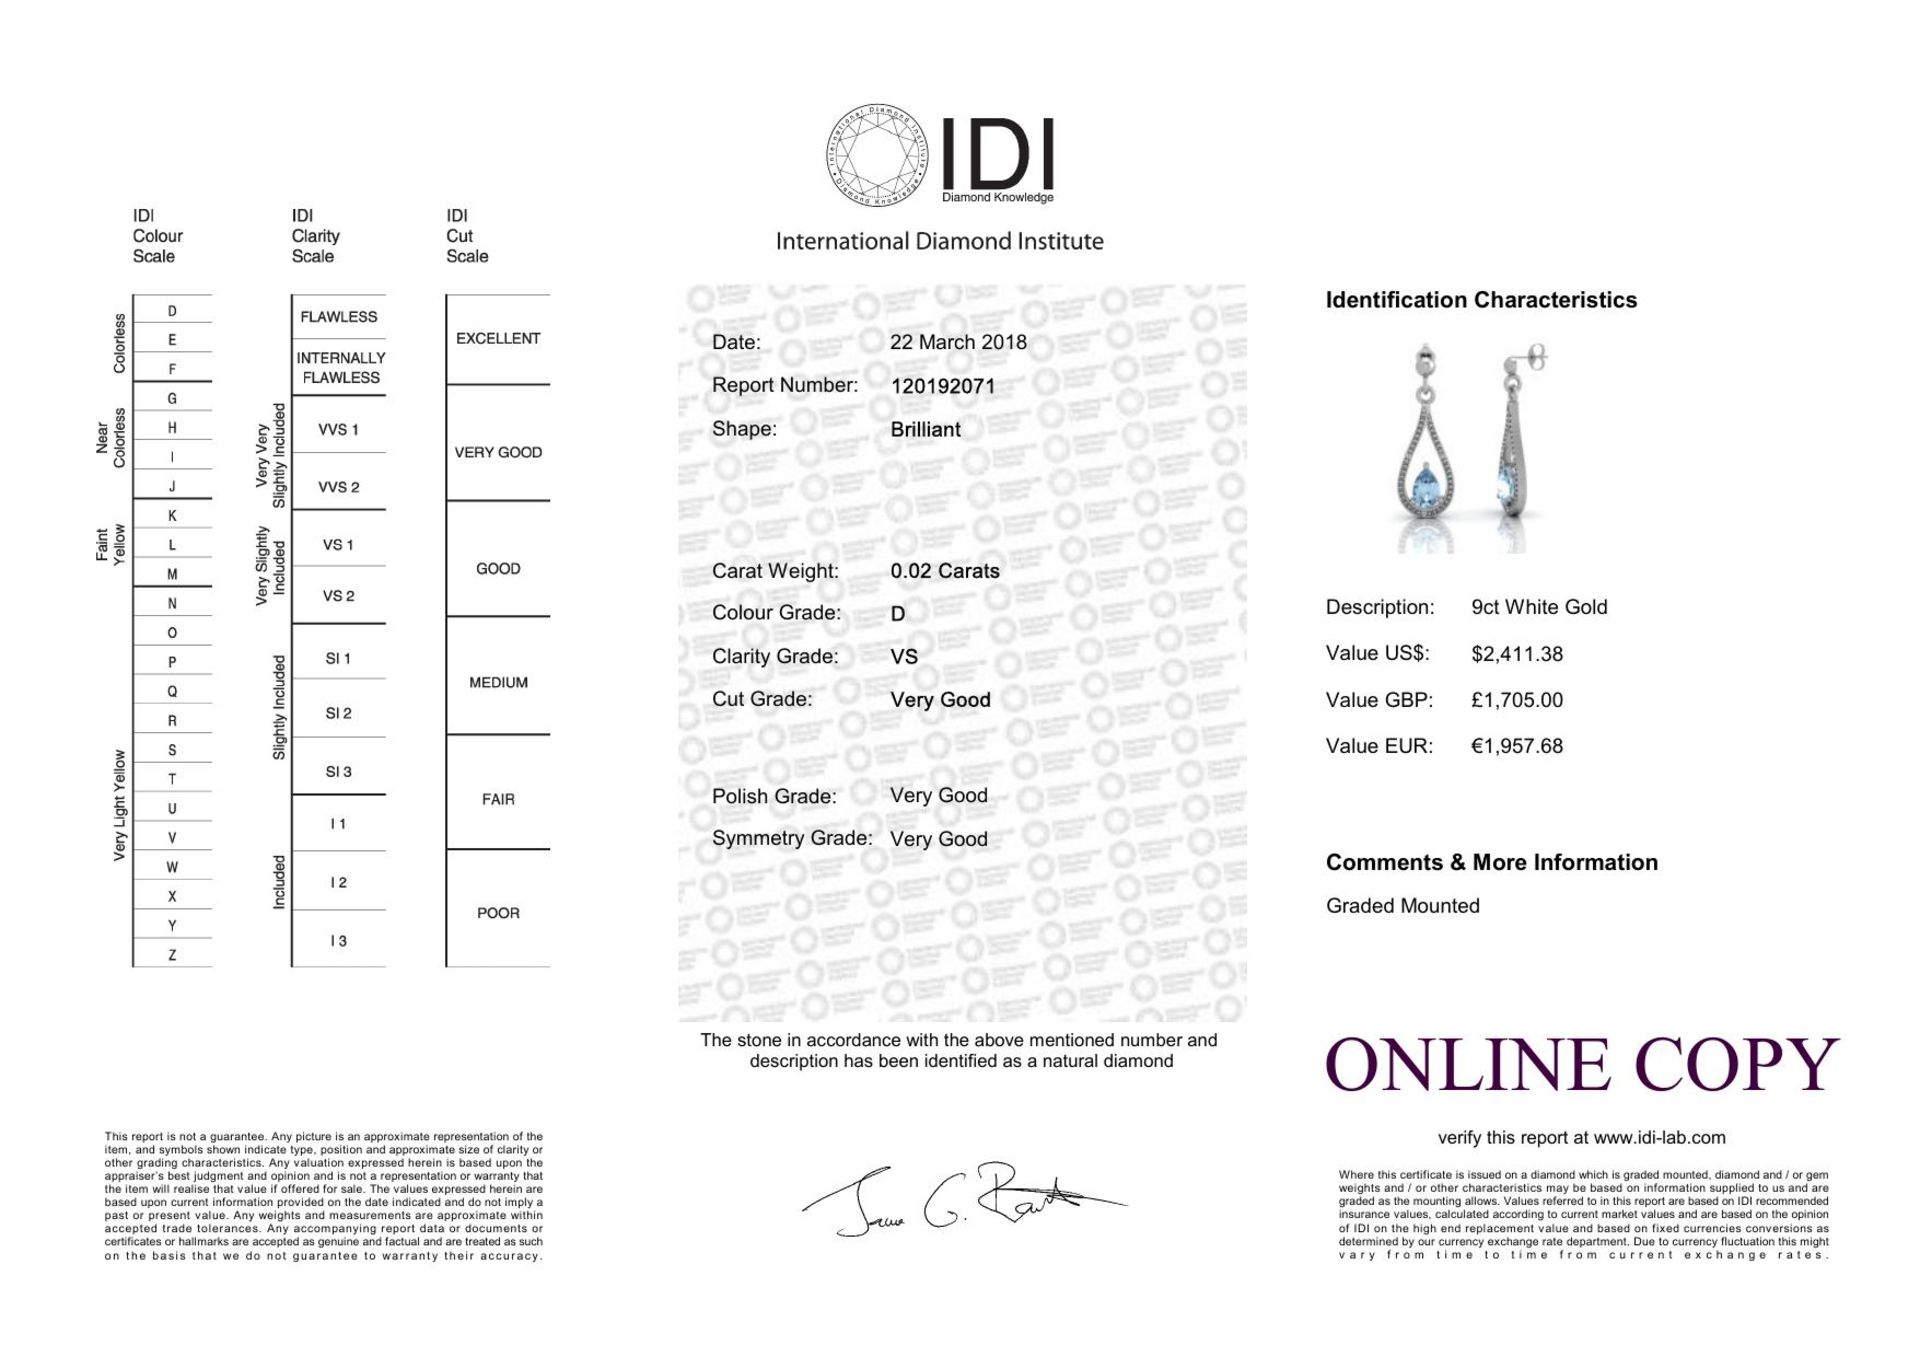 9ct White Gold Diamond And Blue Topaz Earring (BT 0.76) 0.02 Carats - Valued By IDI £1,705.00 - - Image 4 of 4